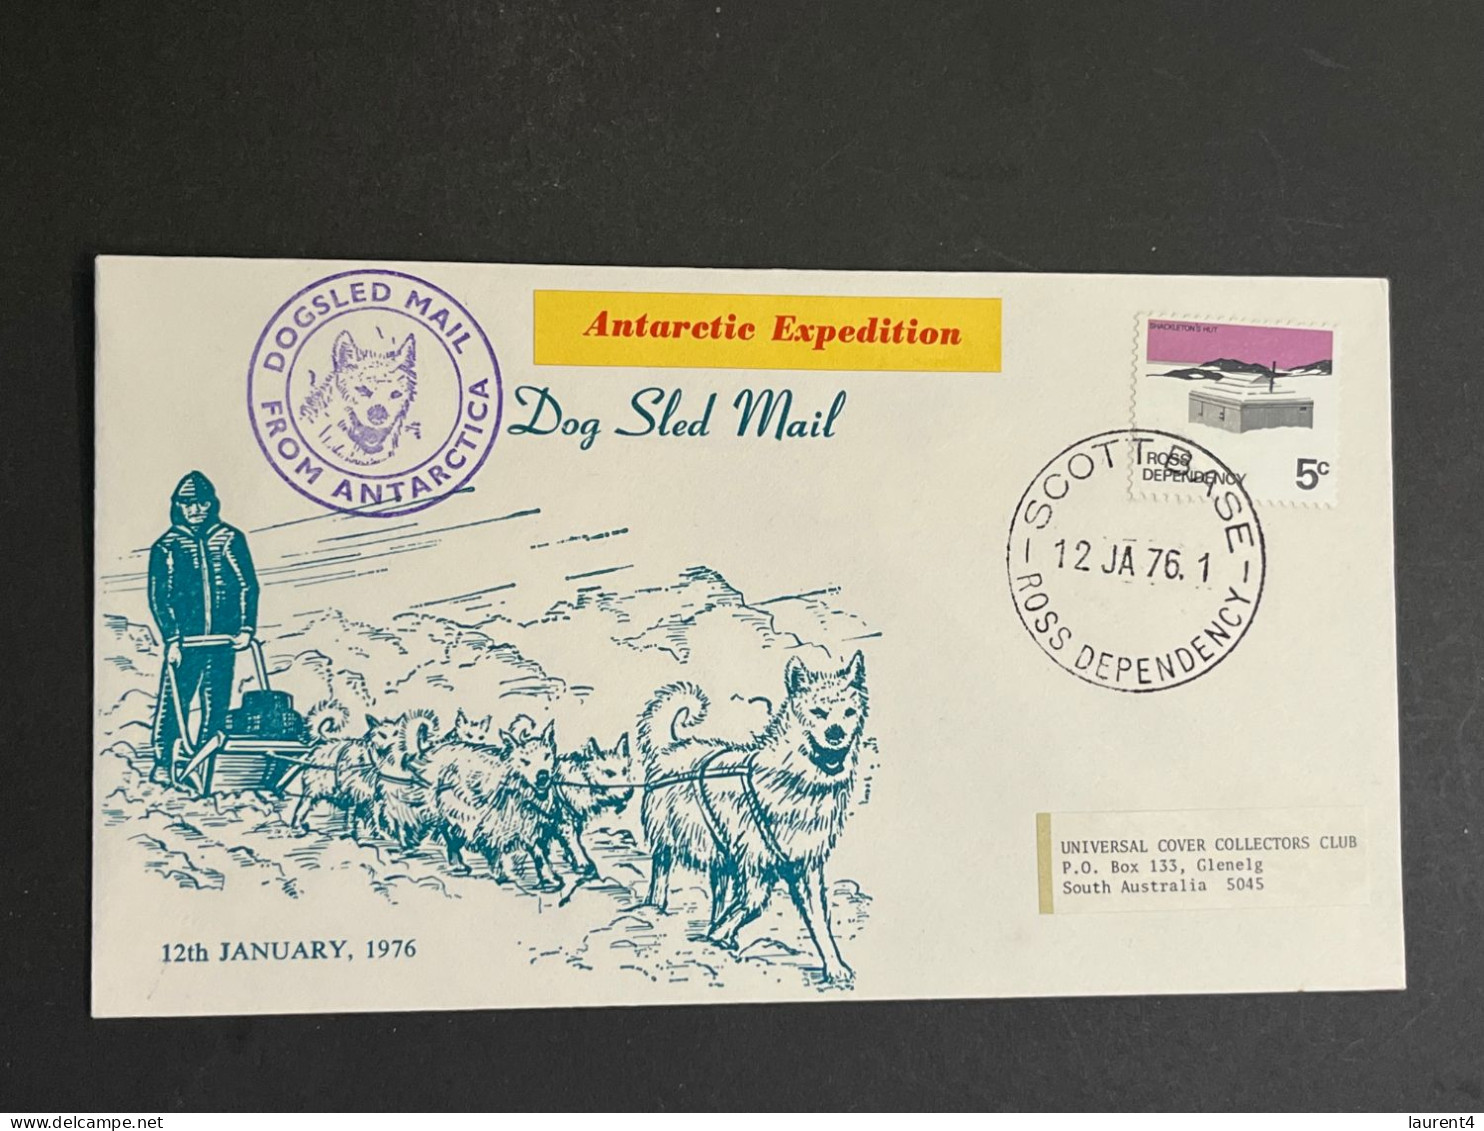 (1 Q 24 A) New Zealand Antarctica - Ross Dependency - Dog Sled Mail (Antarctic Expedition Cover) 12th January 1976 - FDC